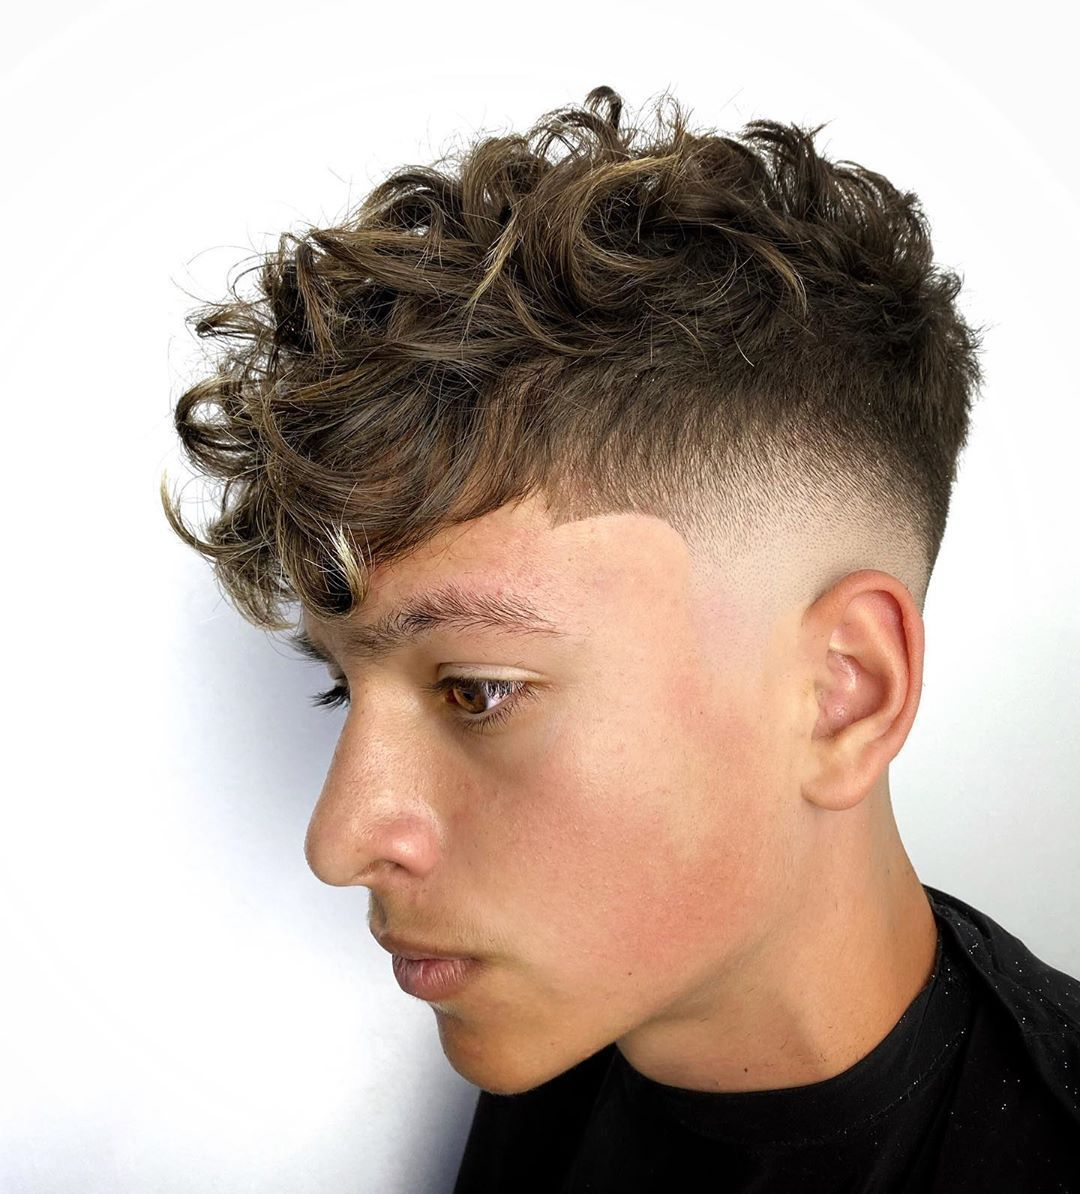 How To Style Curly Hair Men And Top 10 Trends in 2022 | KnowInsiders